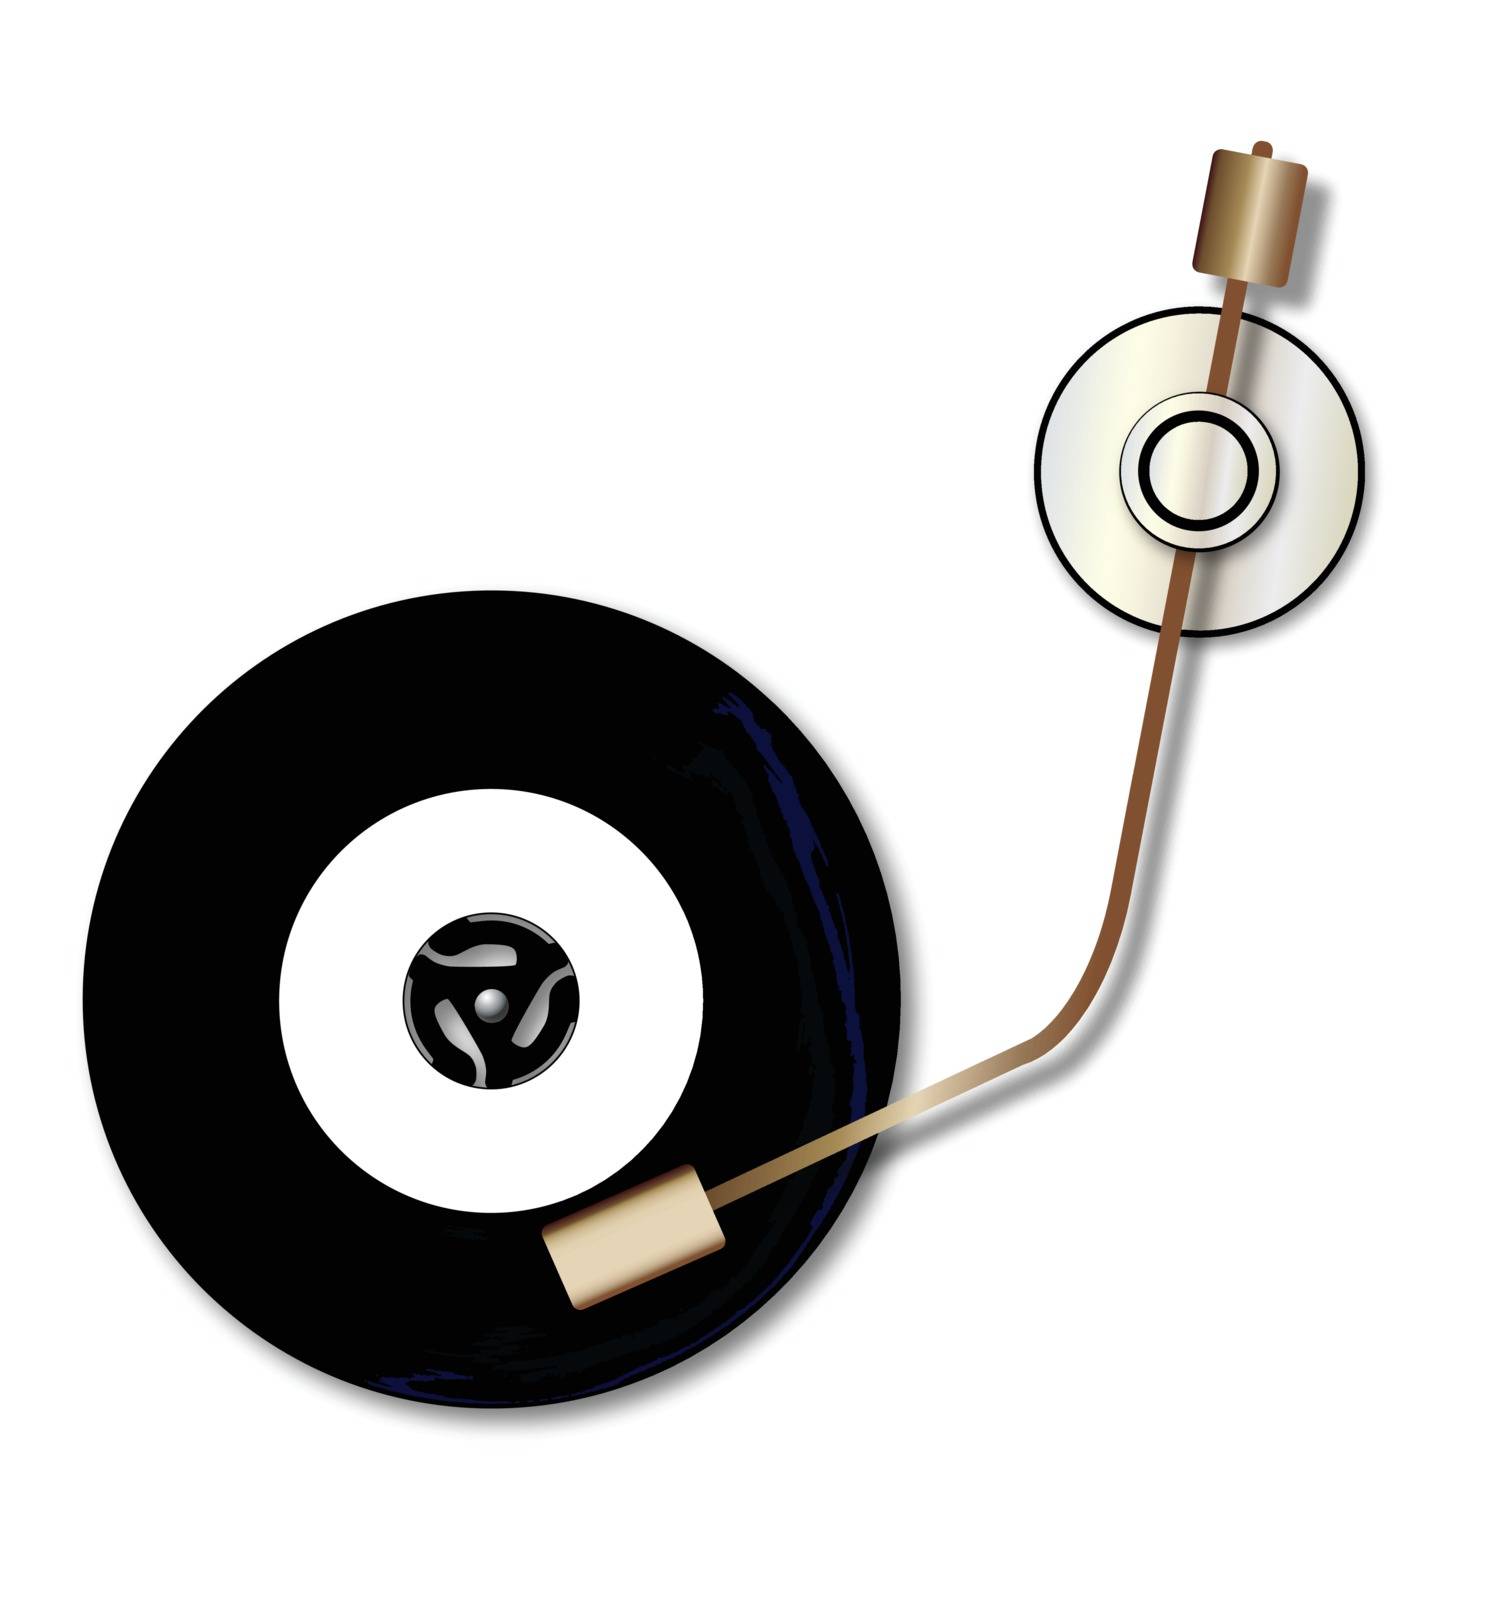 A typical vinyl record with a blank labell turning on a record player over a white background.